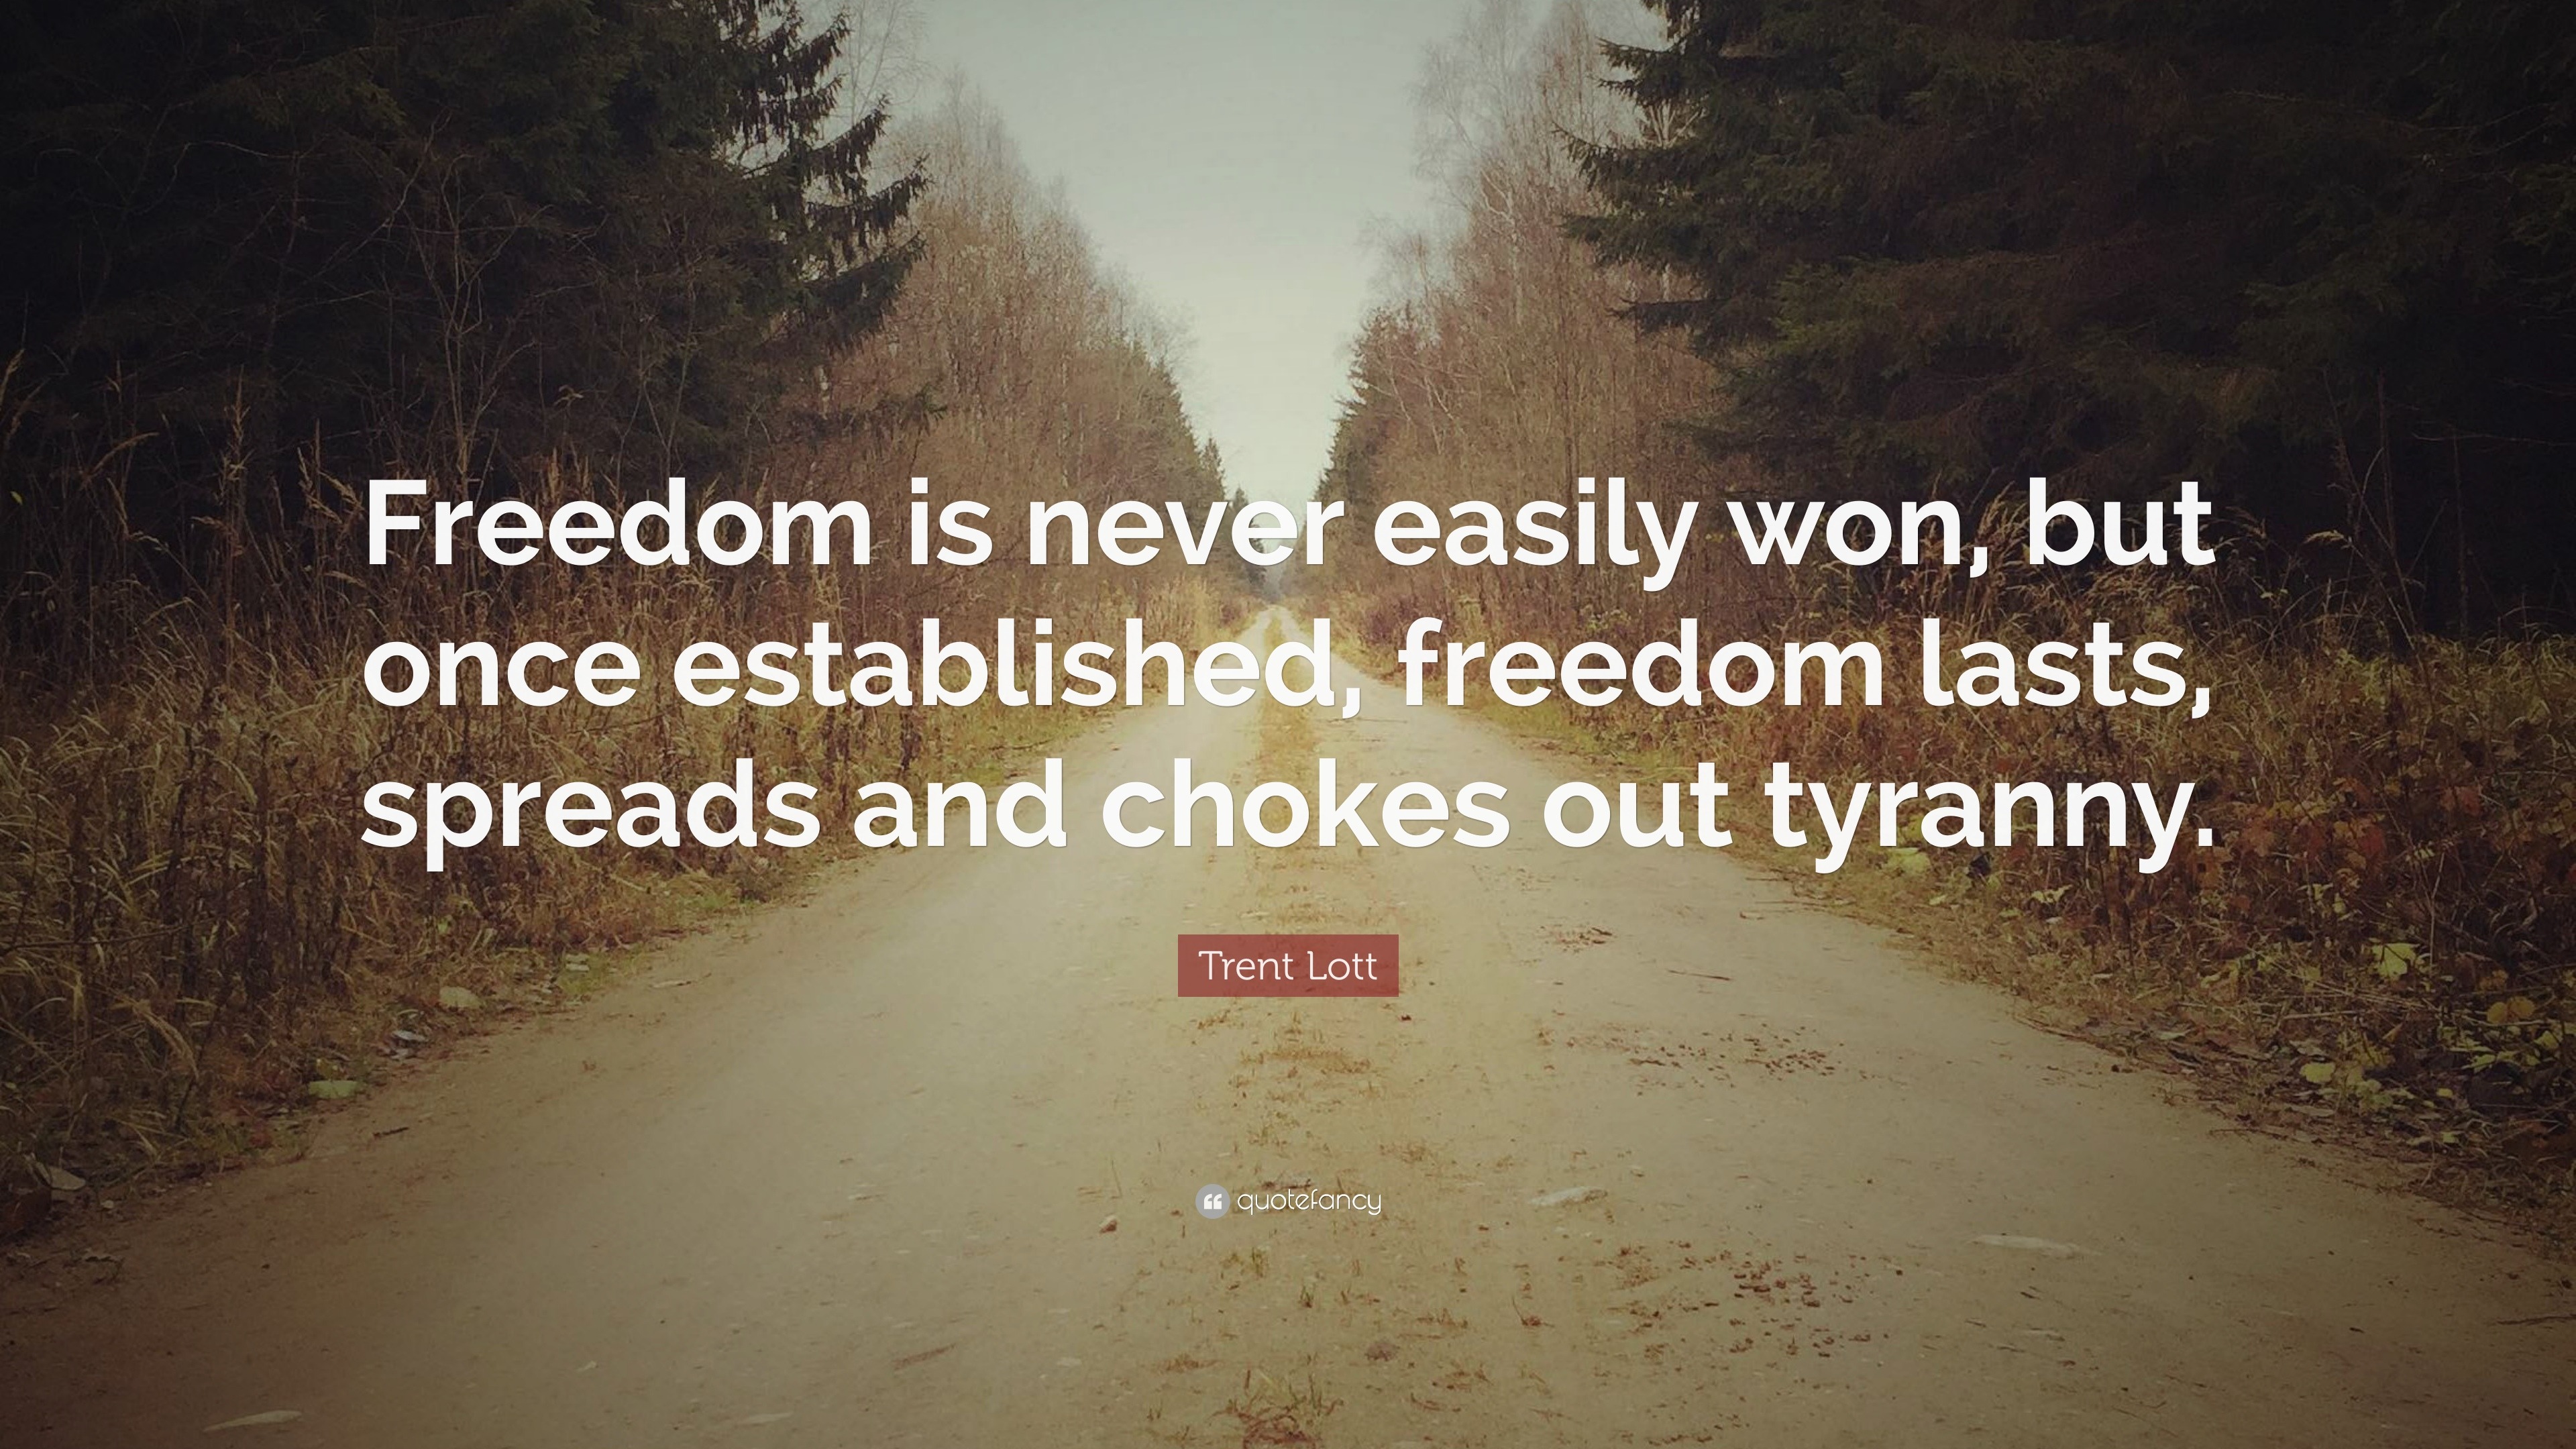 Trent Lott Quote: “Freedom is never easily won, but once established ...